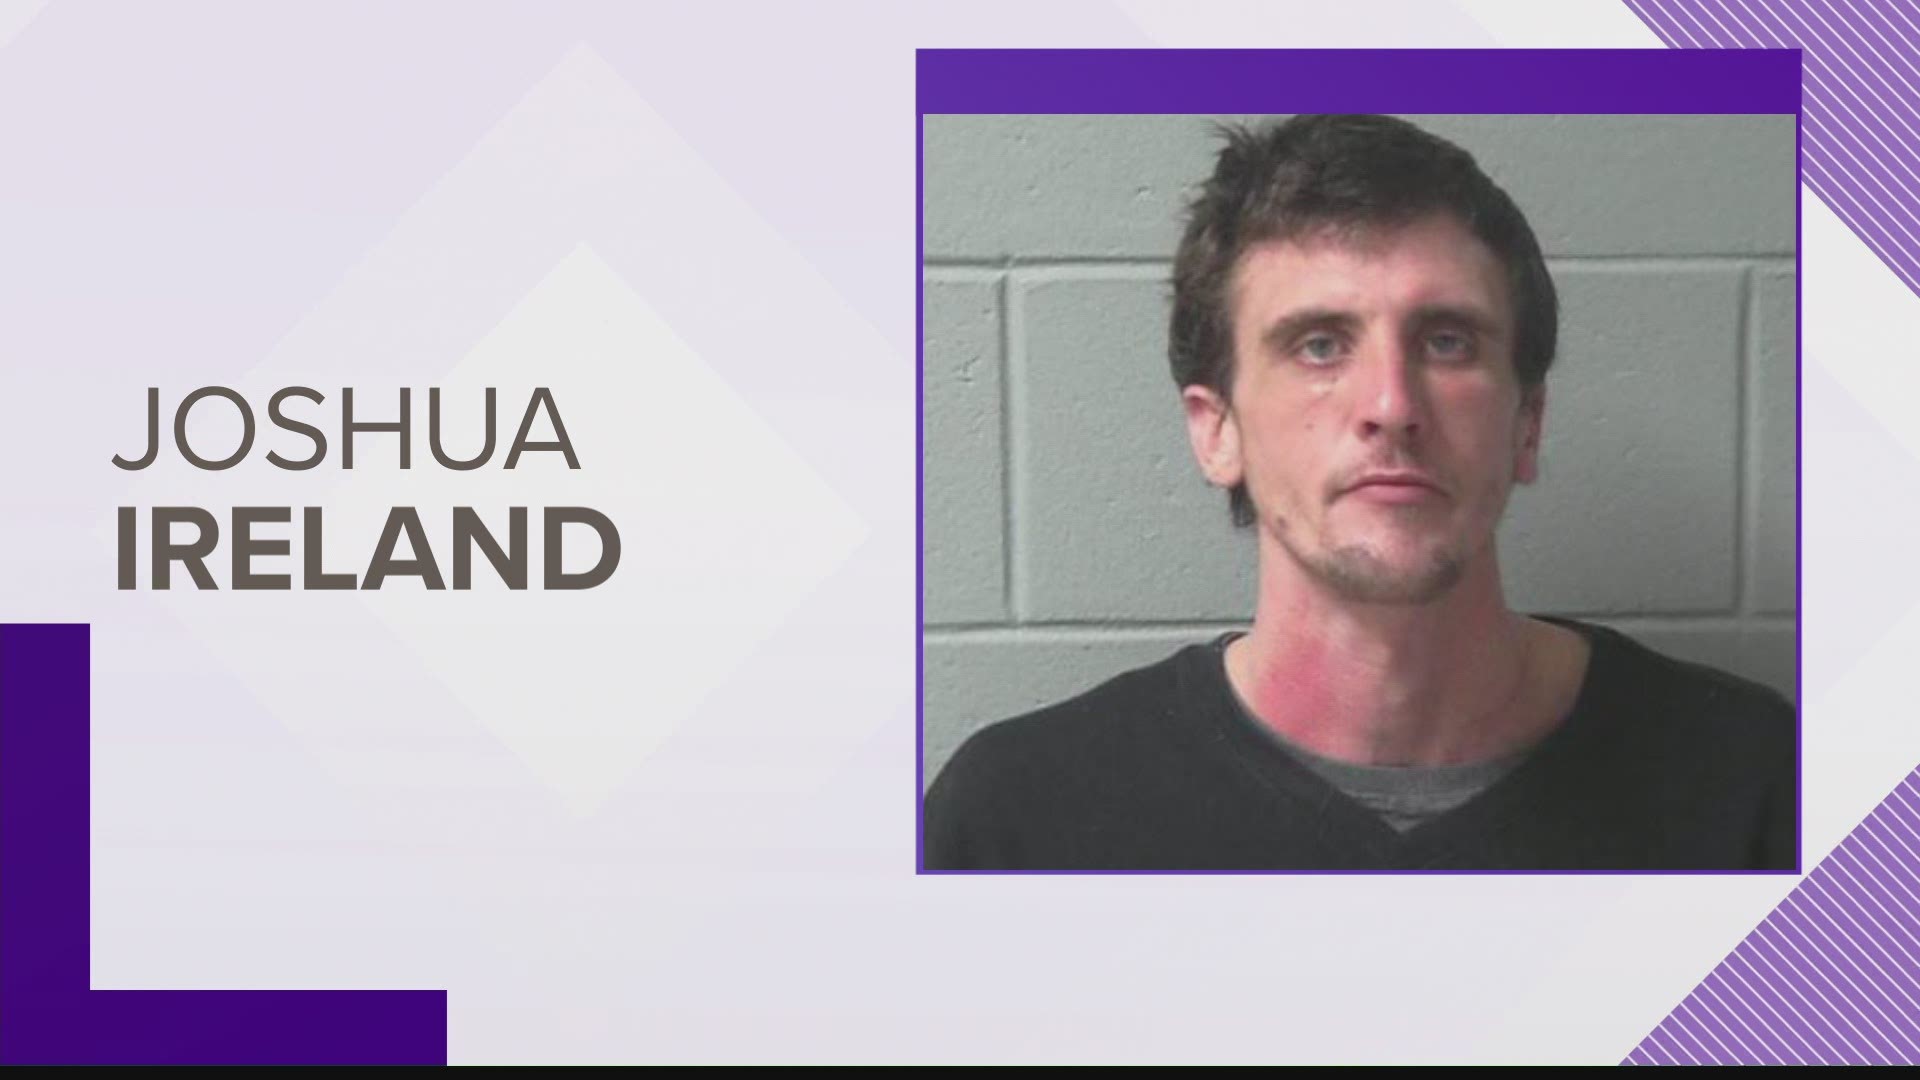 Two officers were allegedly punched by the man they were arresting, Joshua Ireland, who police say robbed the Corner Store convenience store.